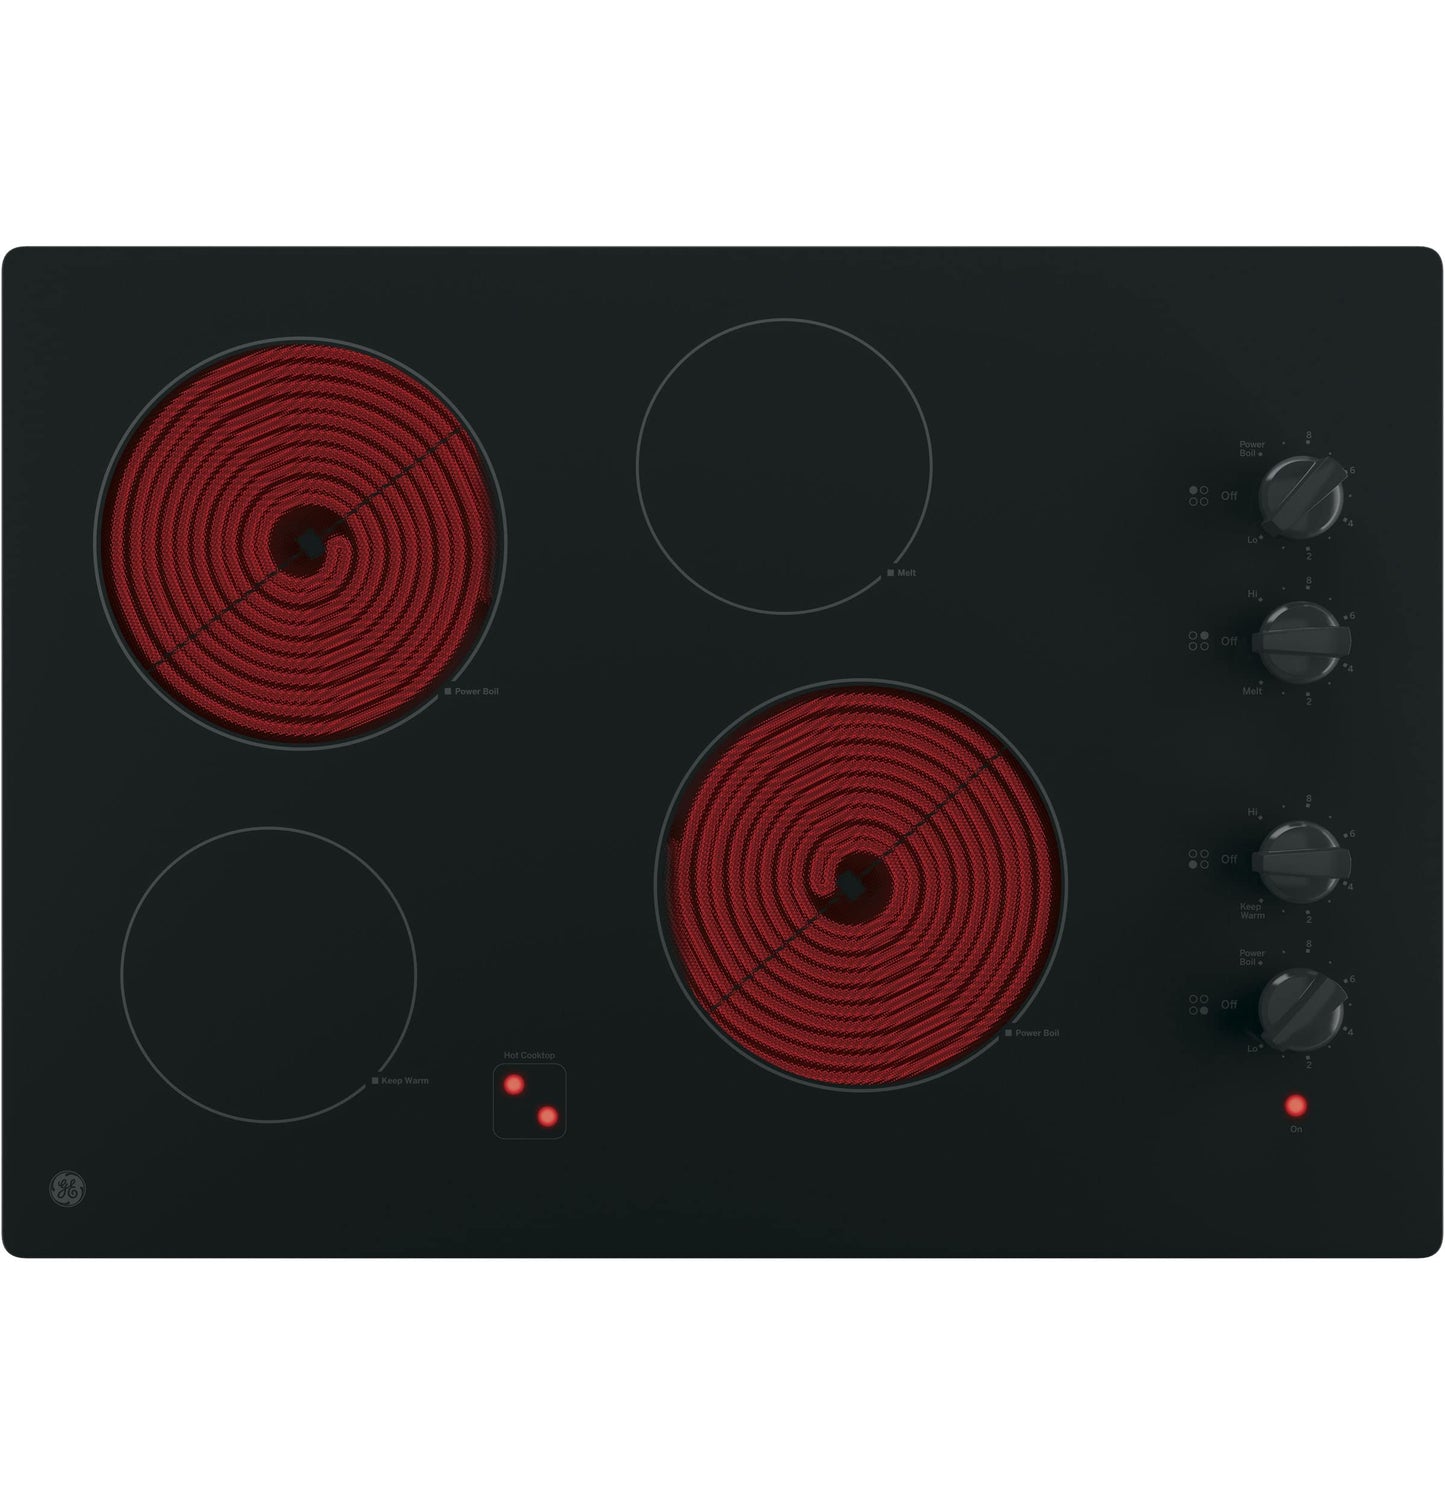 GE JP3030DJBB 30 Inch Smoothtop Electric Cooktop with 4 Radiant Elements, Knob Controls, Keep Warm Melt Setting, Black